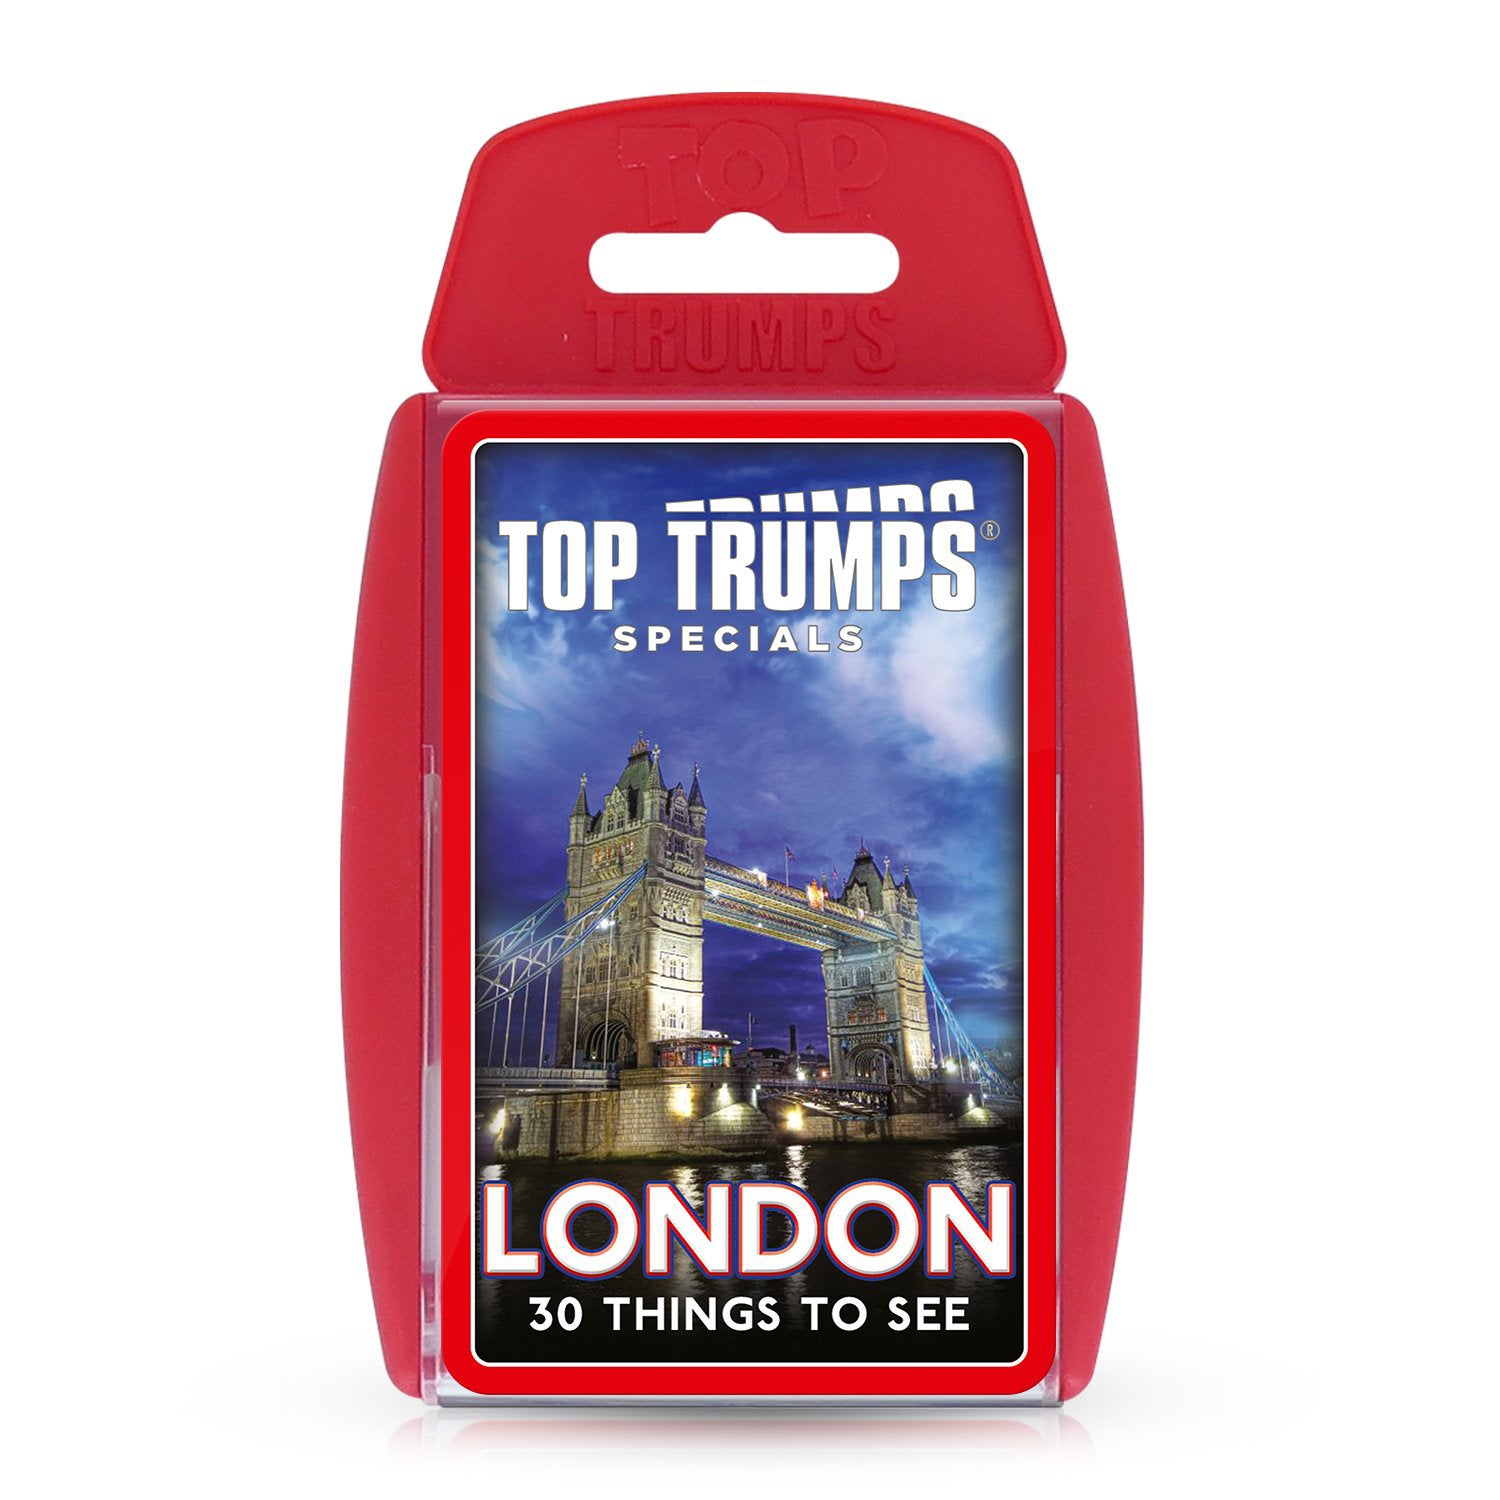 Top Trumps Special London 30 Things To See 1